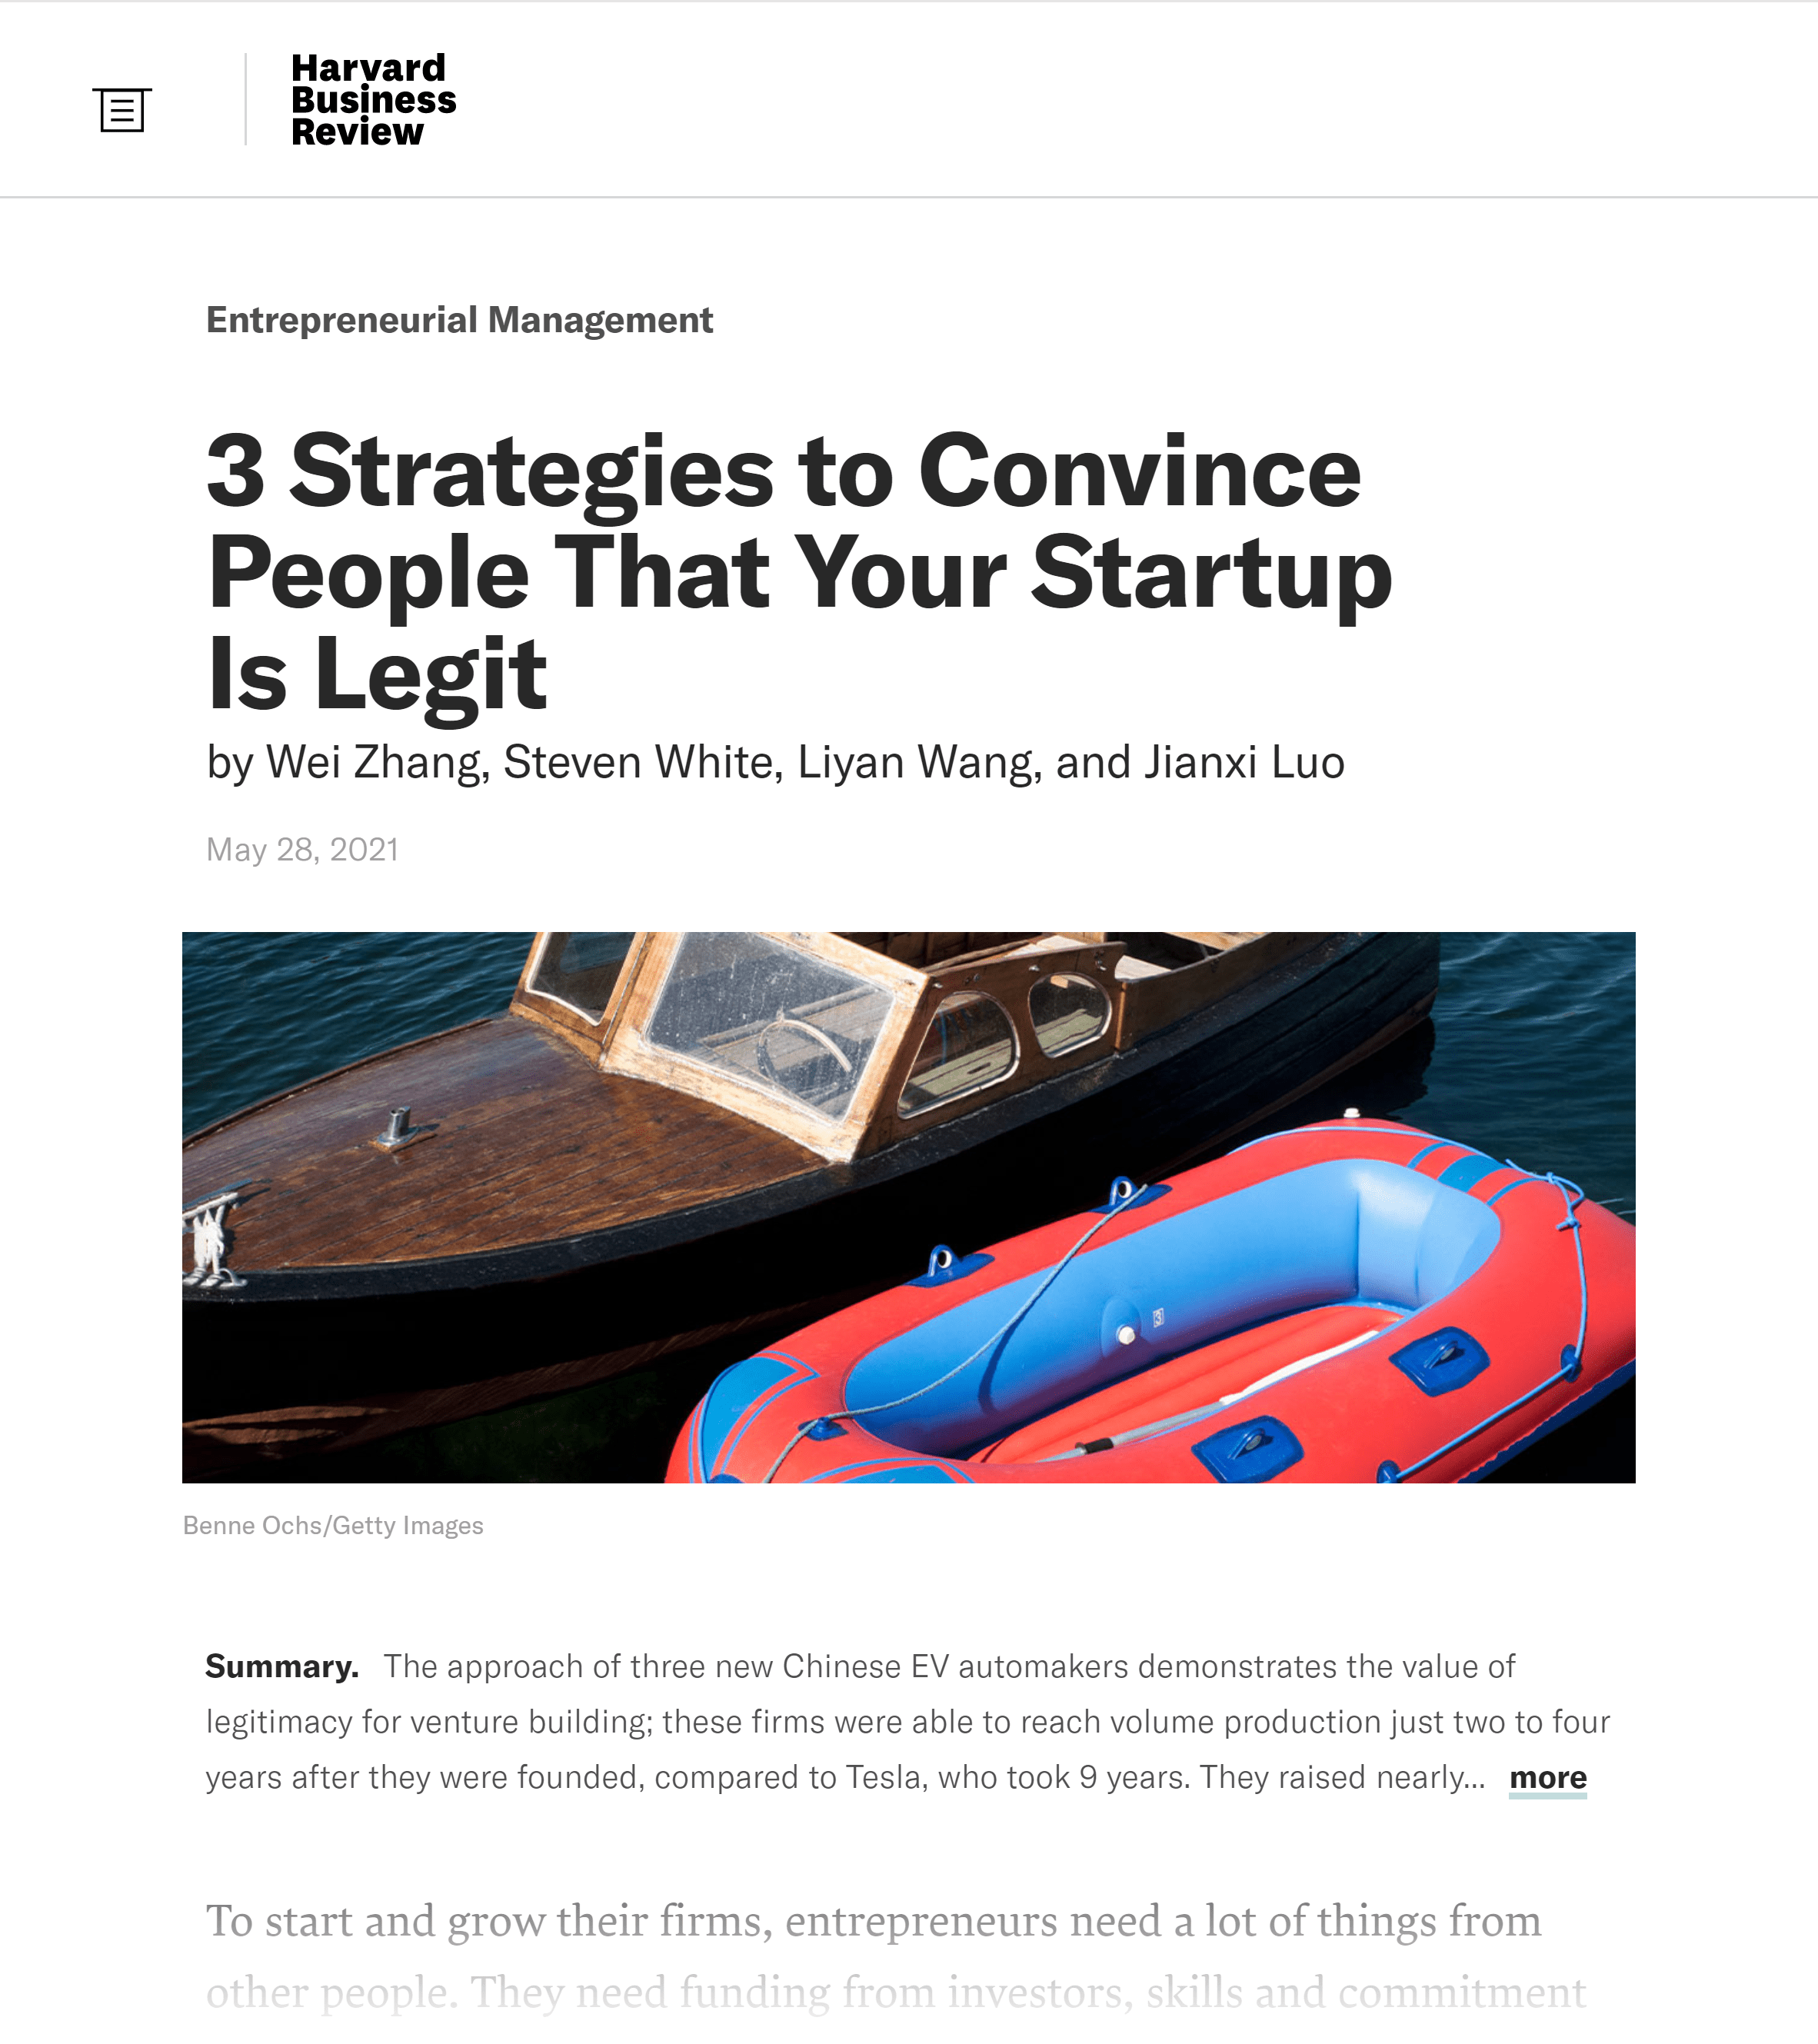 HBR – Strategies to convince people